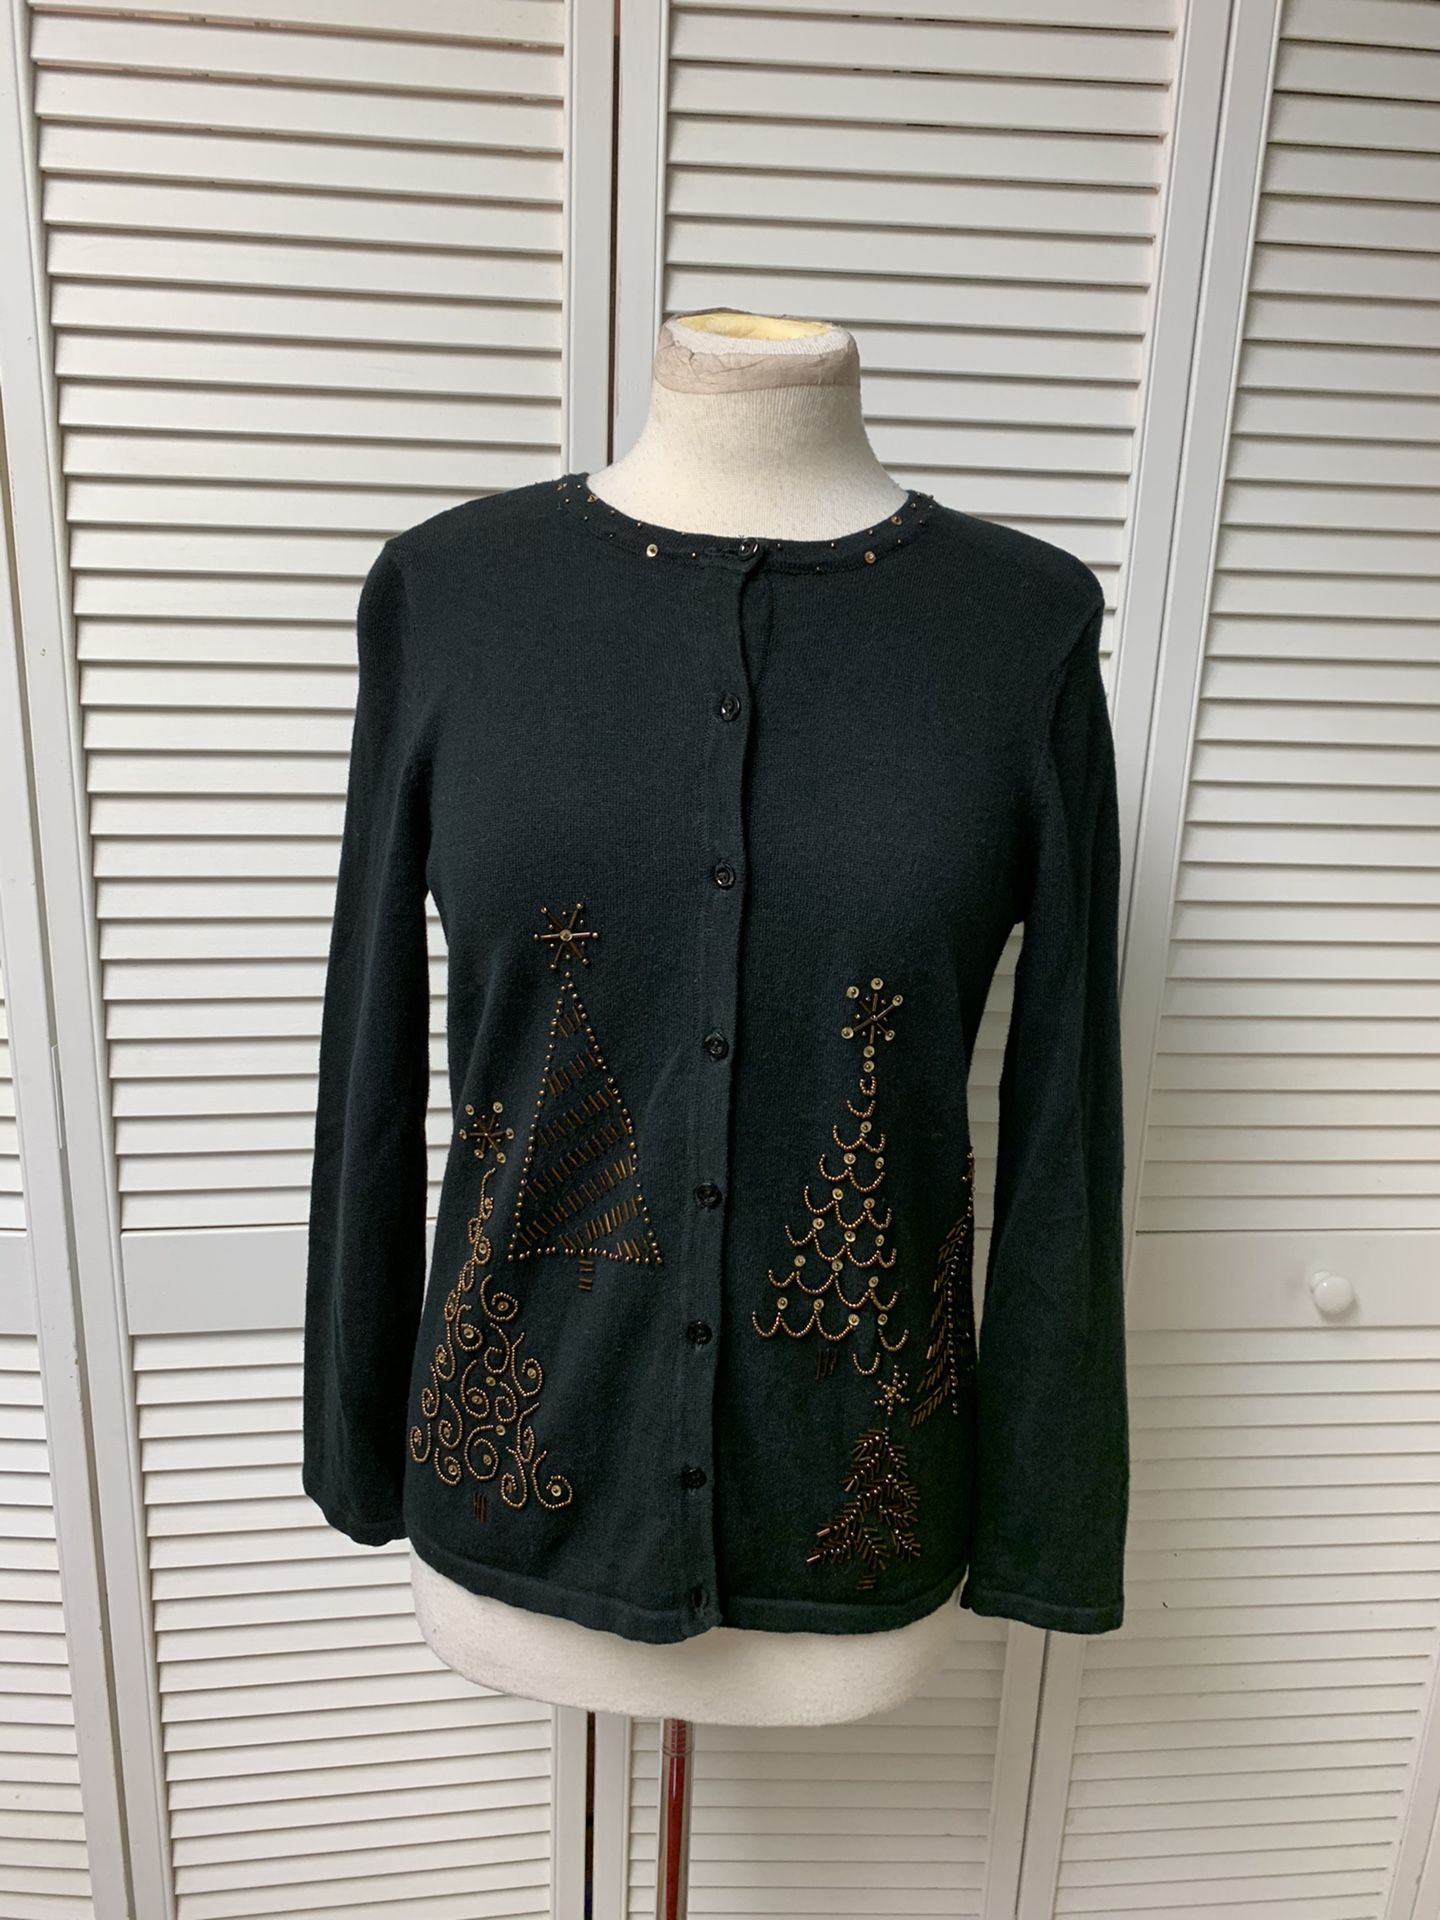 Black cardigan sweater with beaded Christmas trees